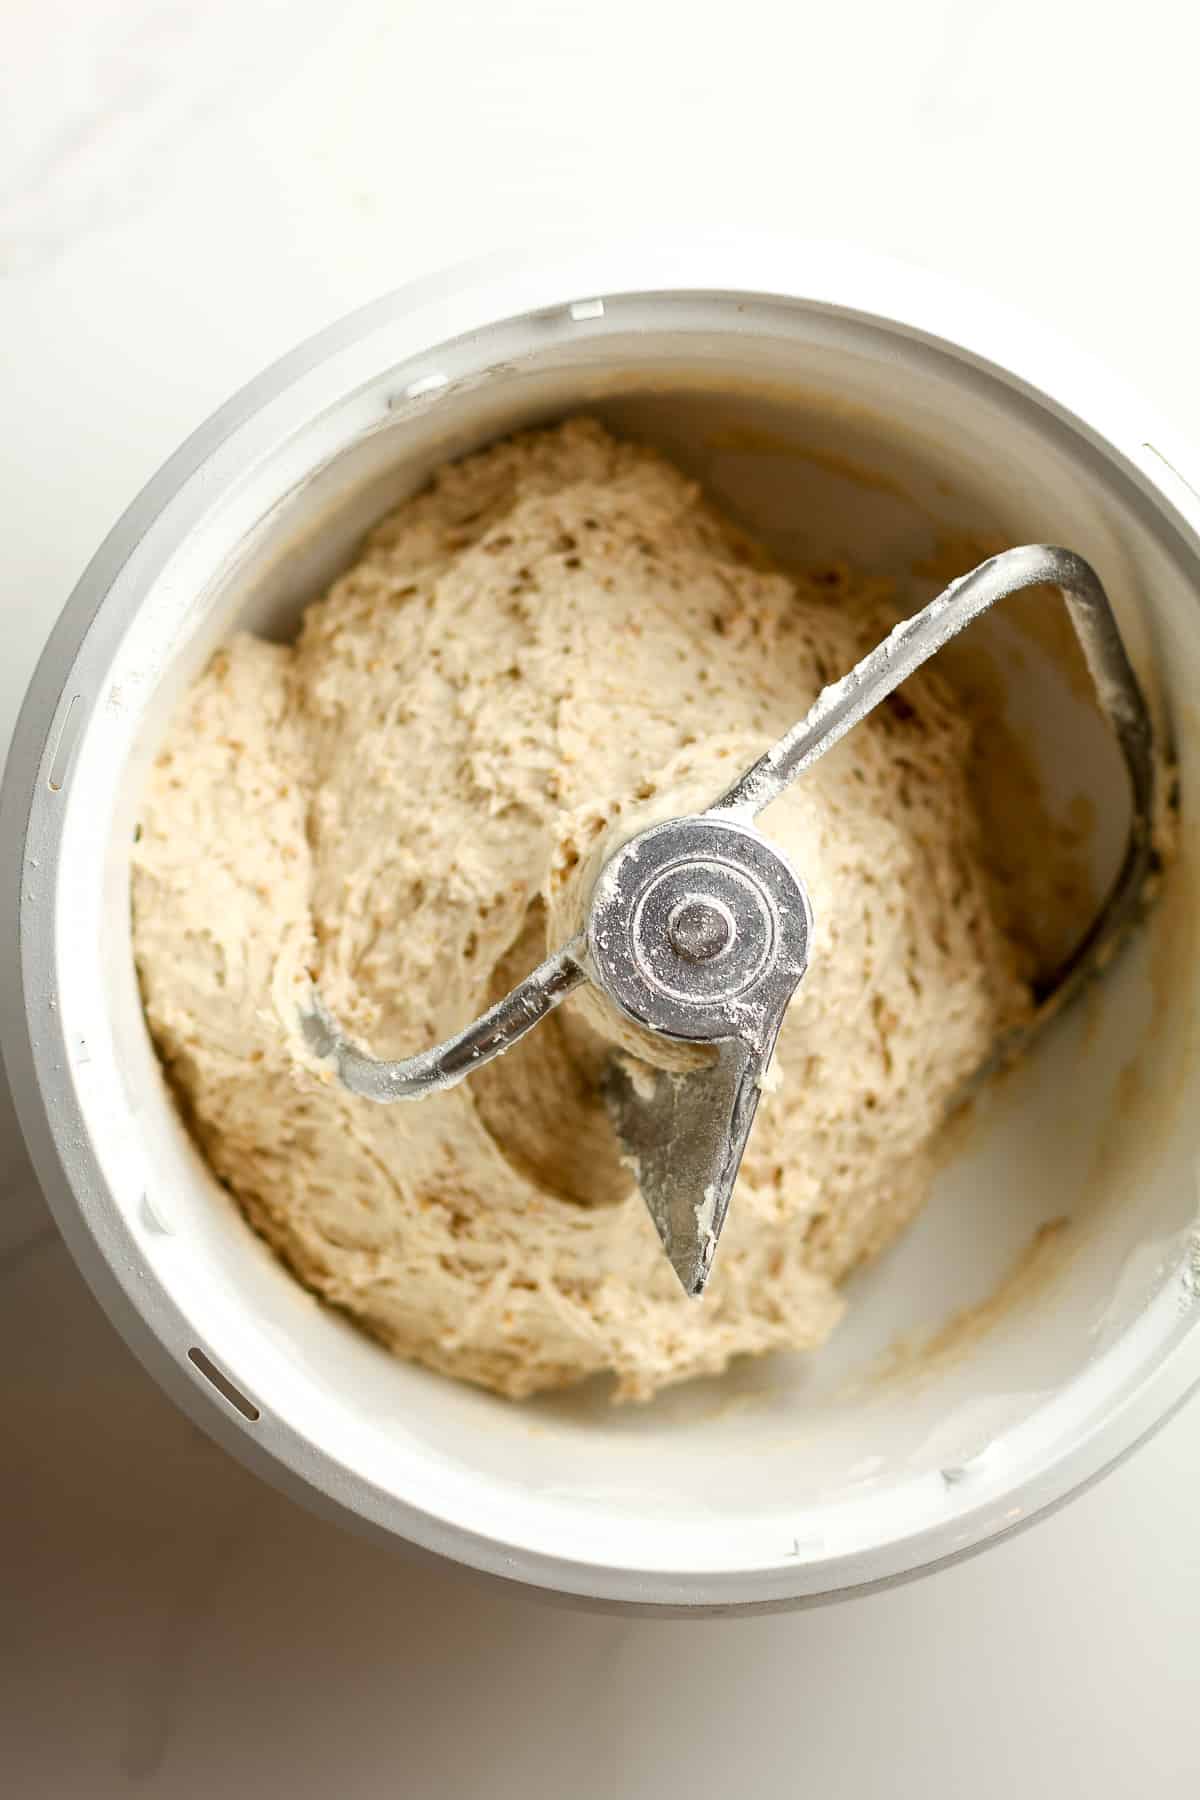 The mixer with the dough inside after adding all the flour.